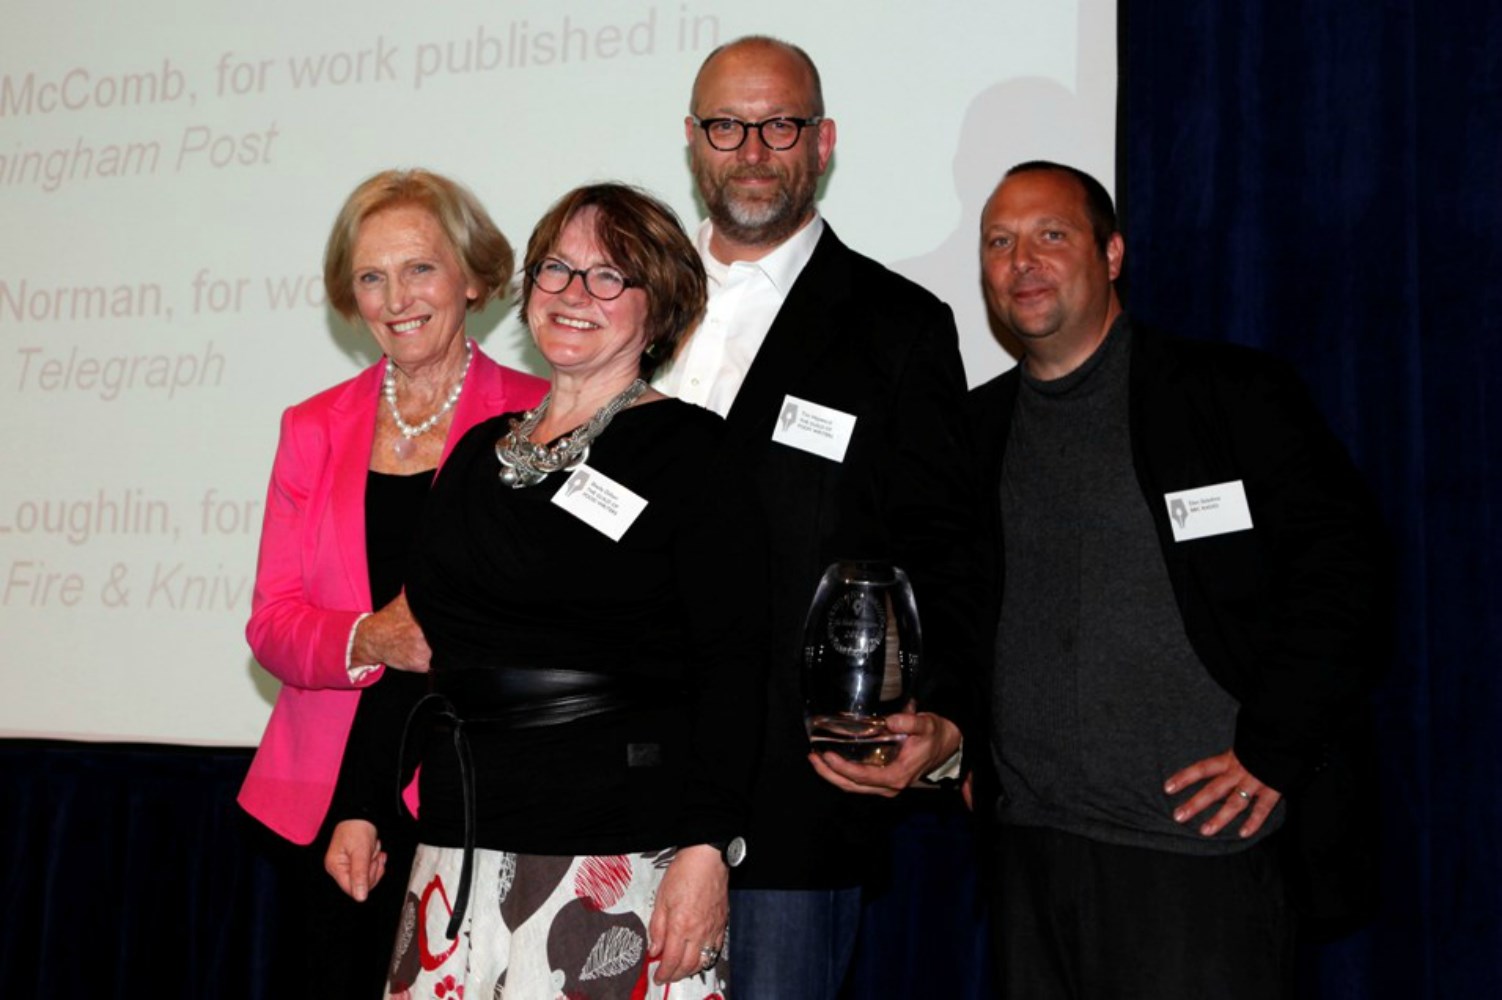 The Food Programme team receiving their second award of the evening: from left to right Mary Berry, Sheila Dillon, Tim Hayward and Dan Saladino